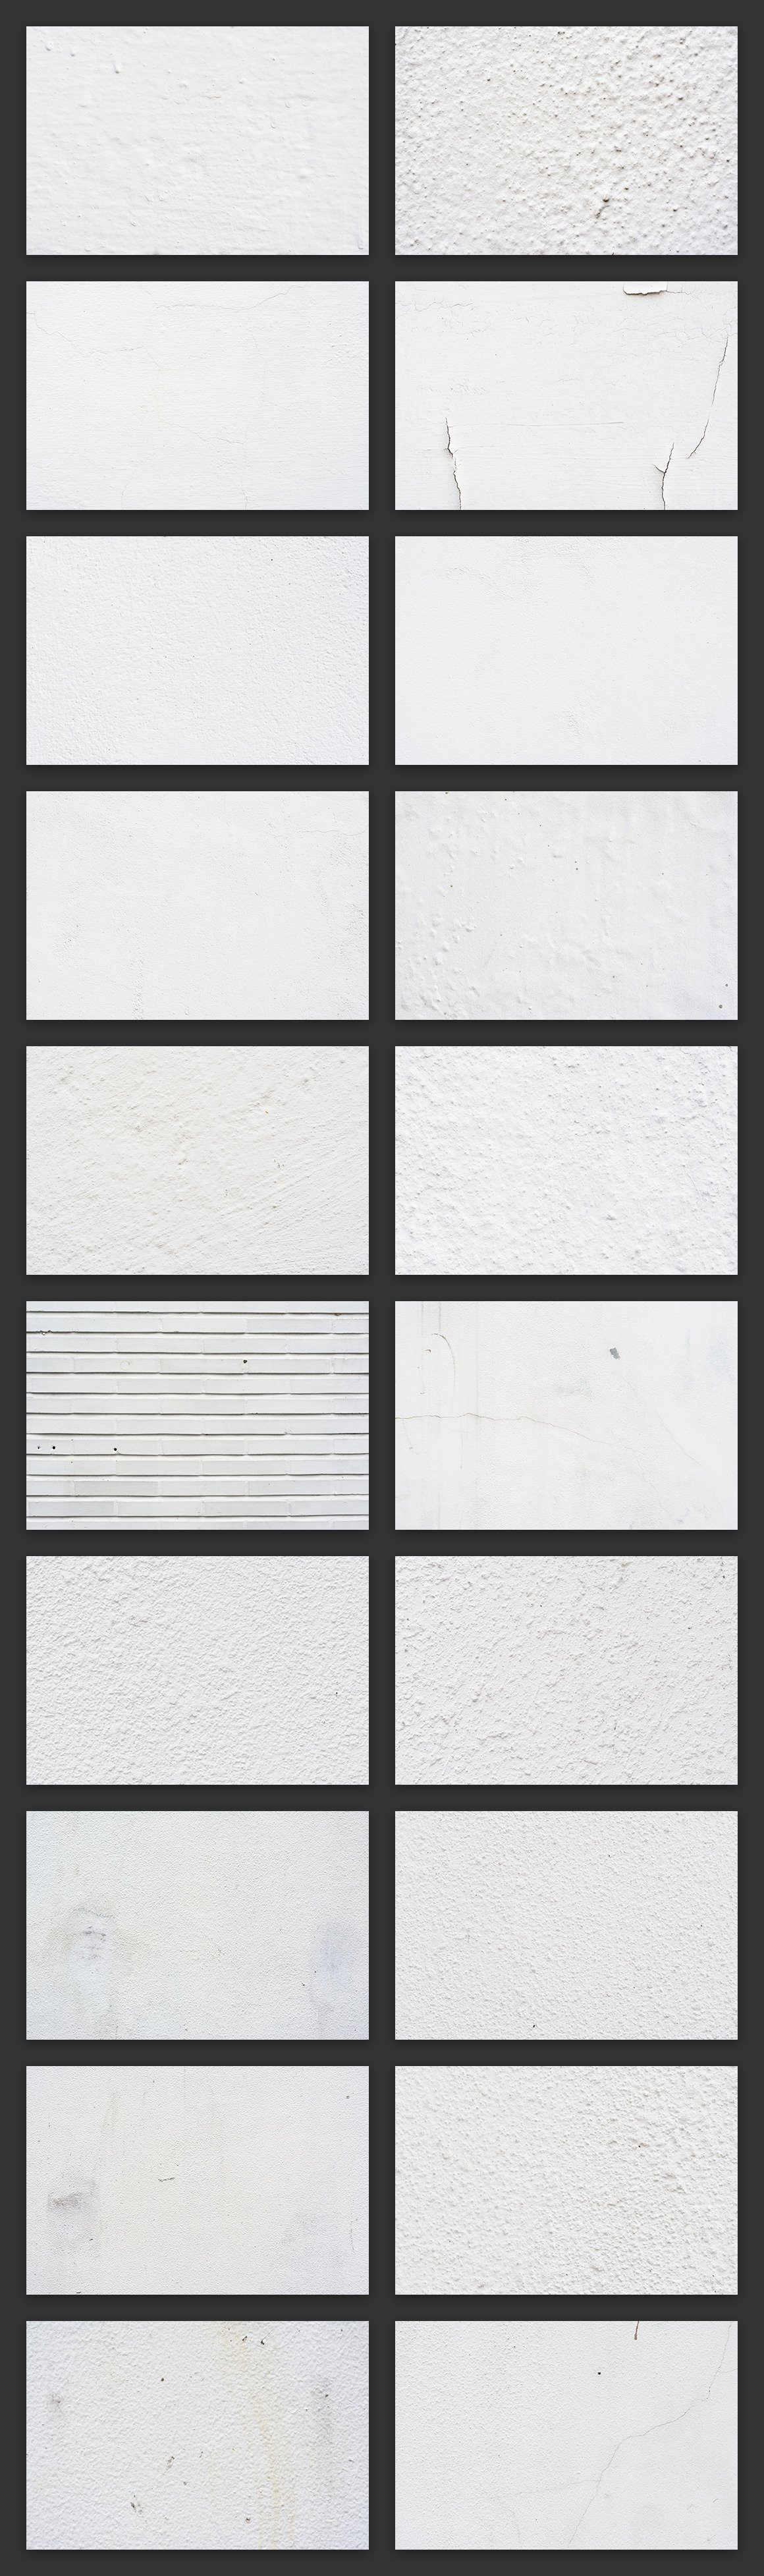 100 White Wall Textures Bundle preview image.